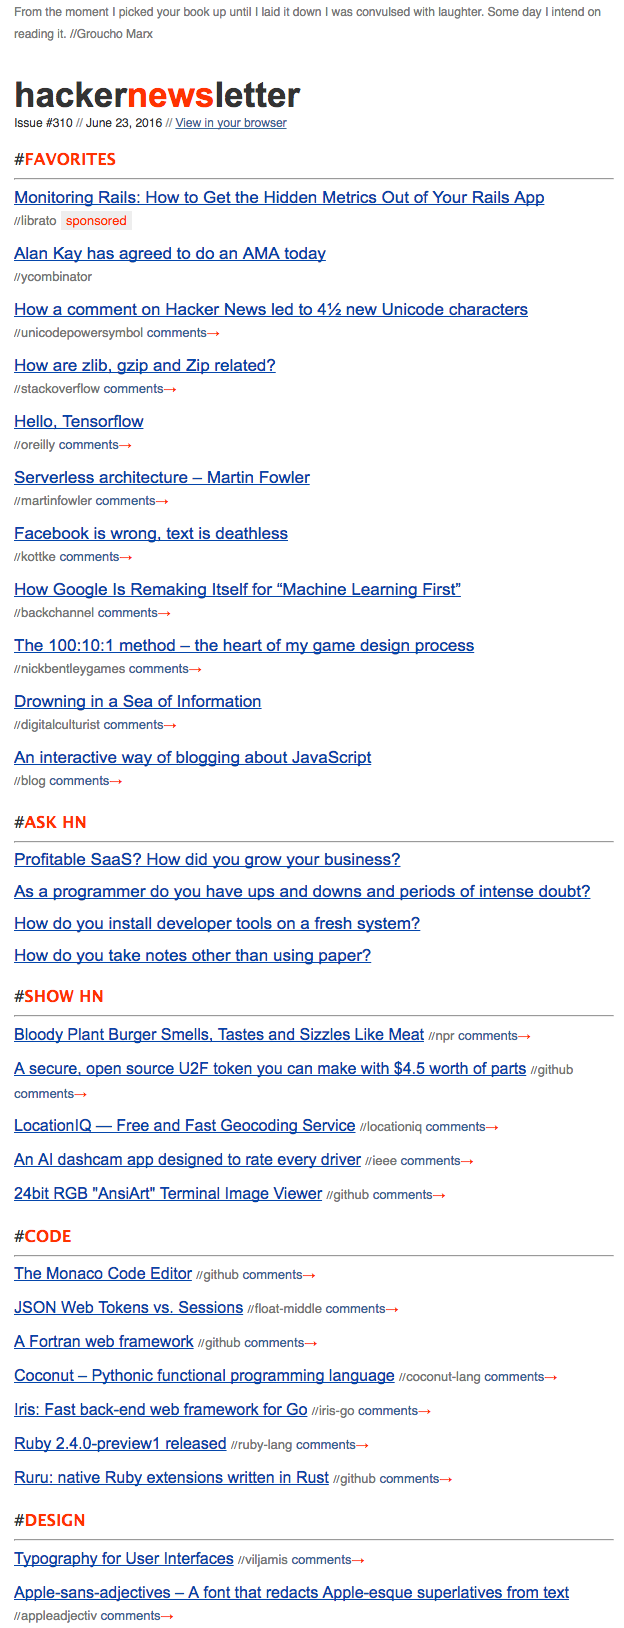 hacker-newsletter-example.png "width =" 624 "height =" 1628